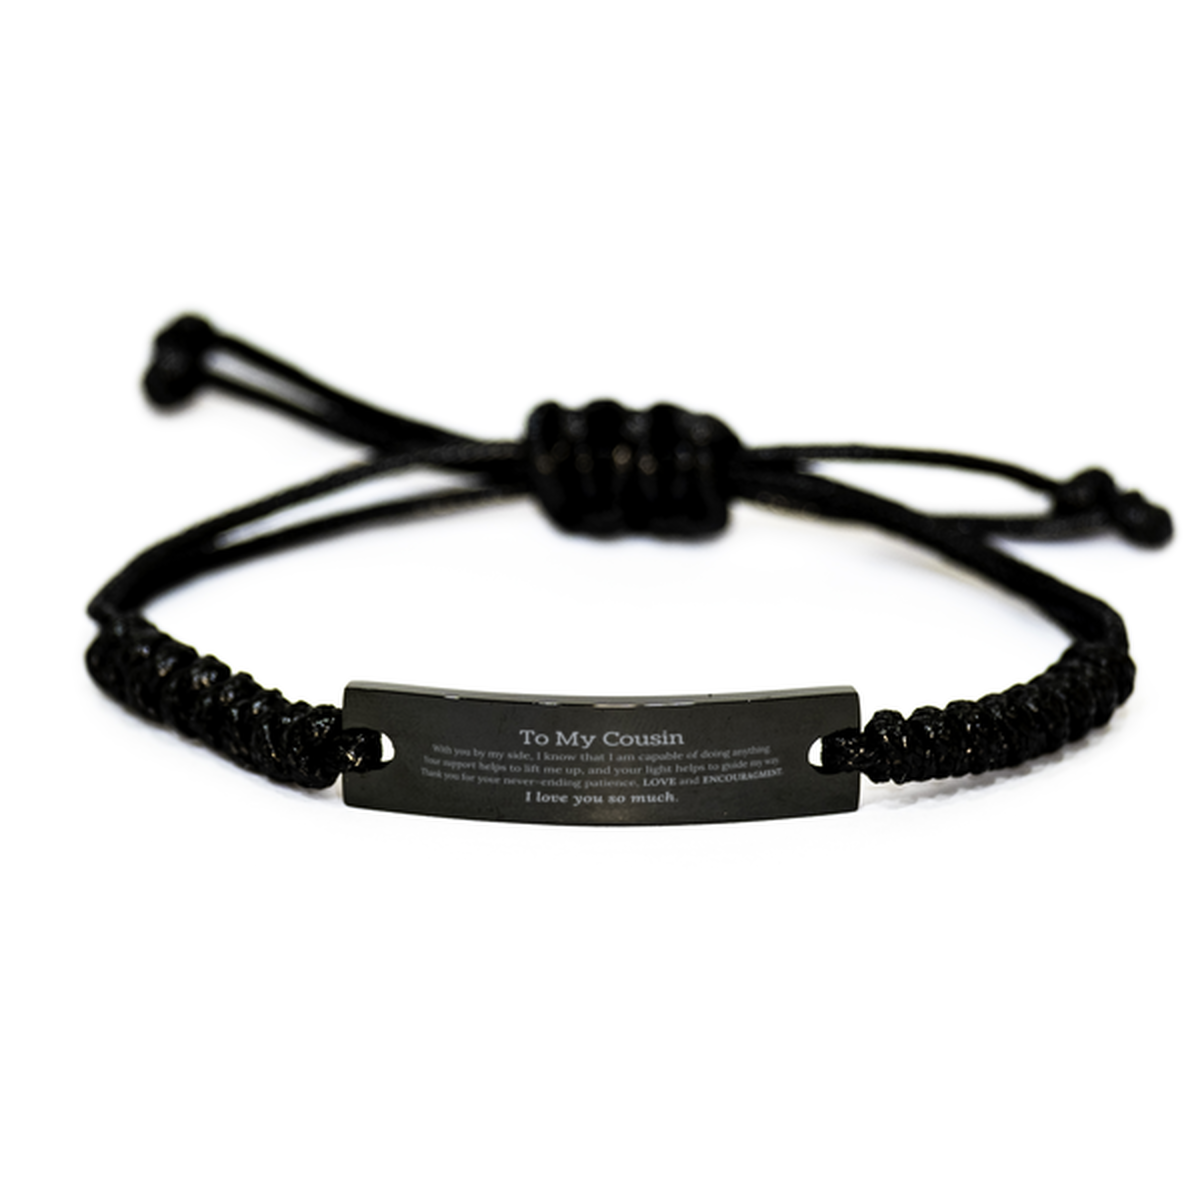 Appreciation Cousin Black Rope Bracelet Gifts, To My Cousin Birthday Christmas Wedding Keepsake Gifts for Cousin With you by my side, I know that I am capable of doing anything. I love you so much